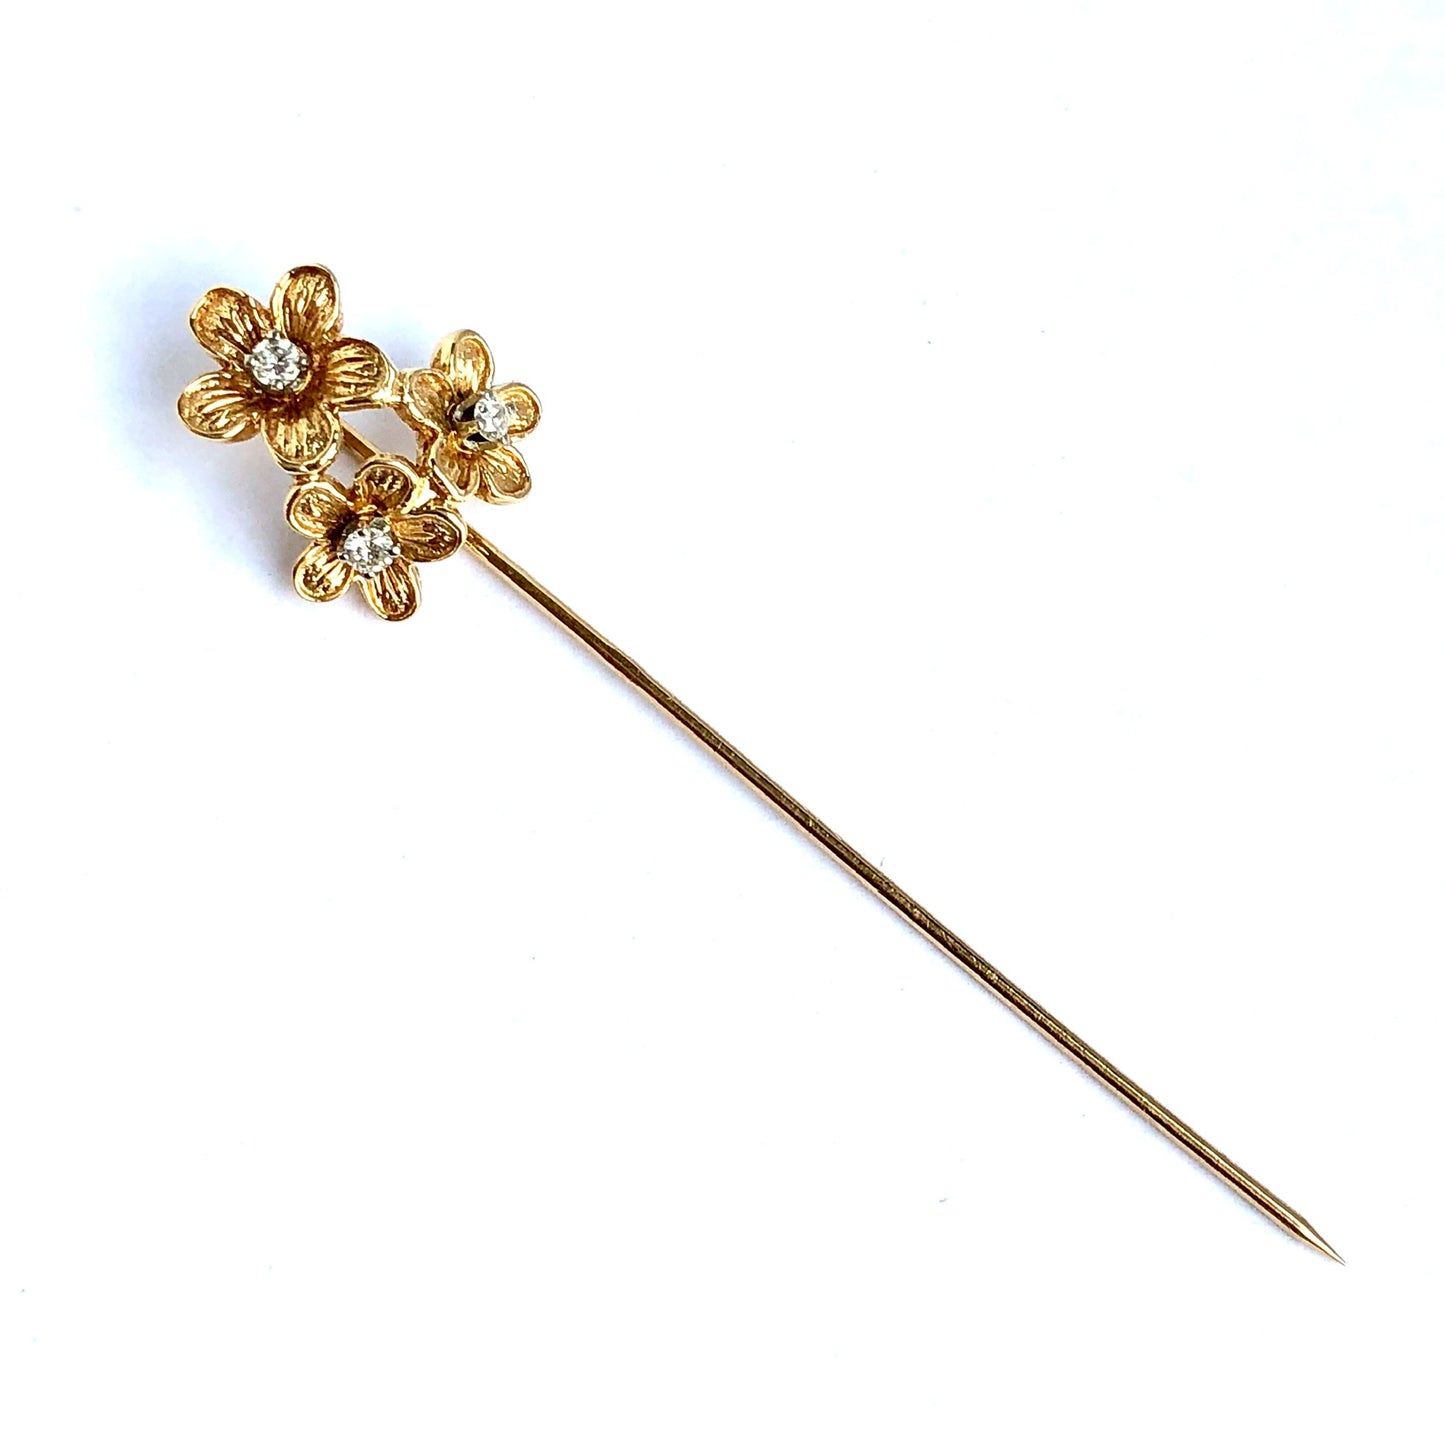 14K Yellow Gold PIN with Genuine DIAMONDS 2.4 Inches Long